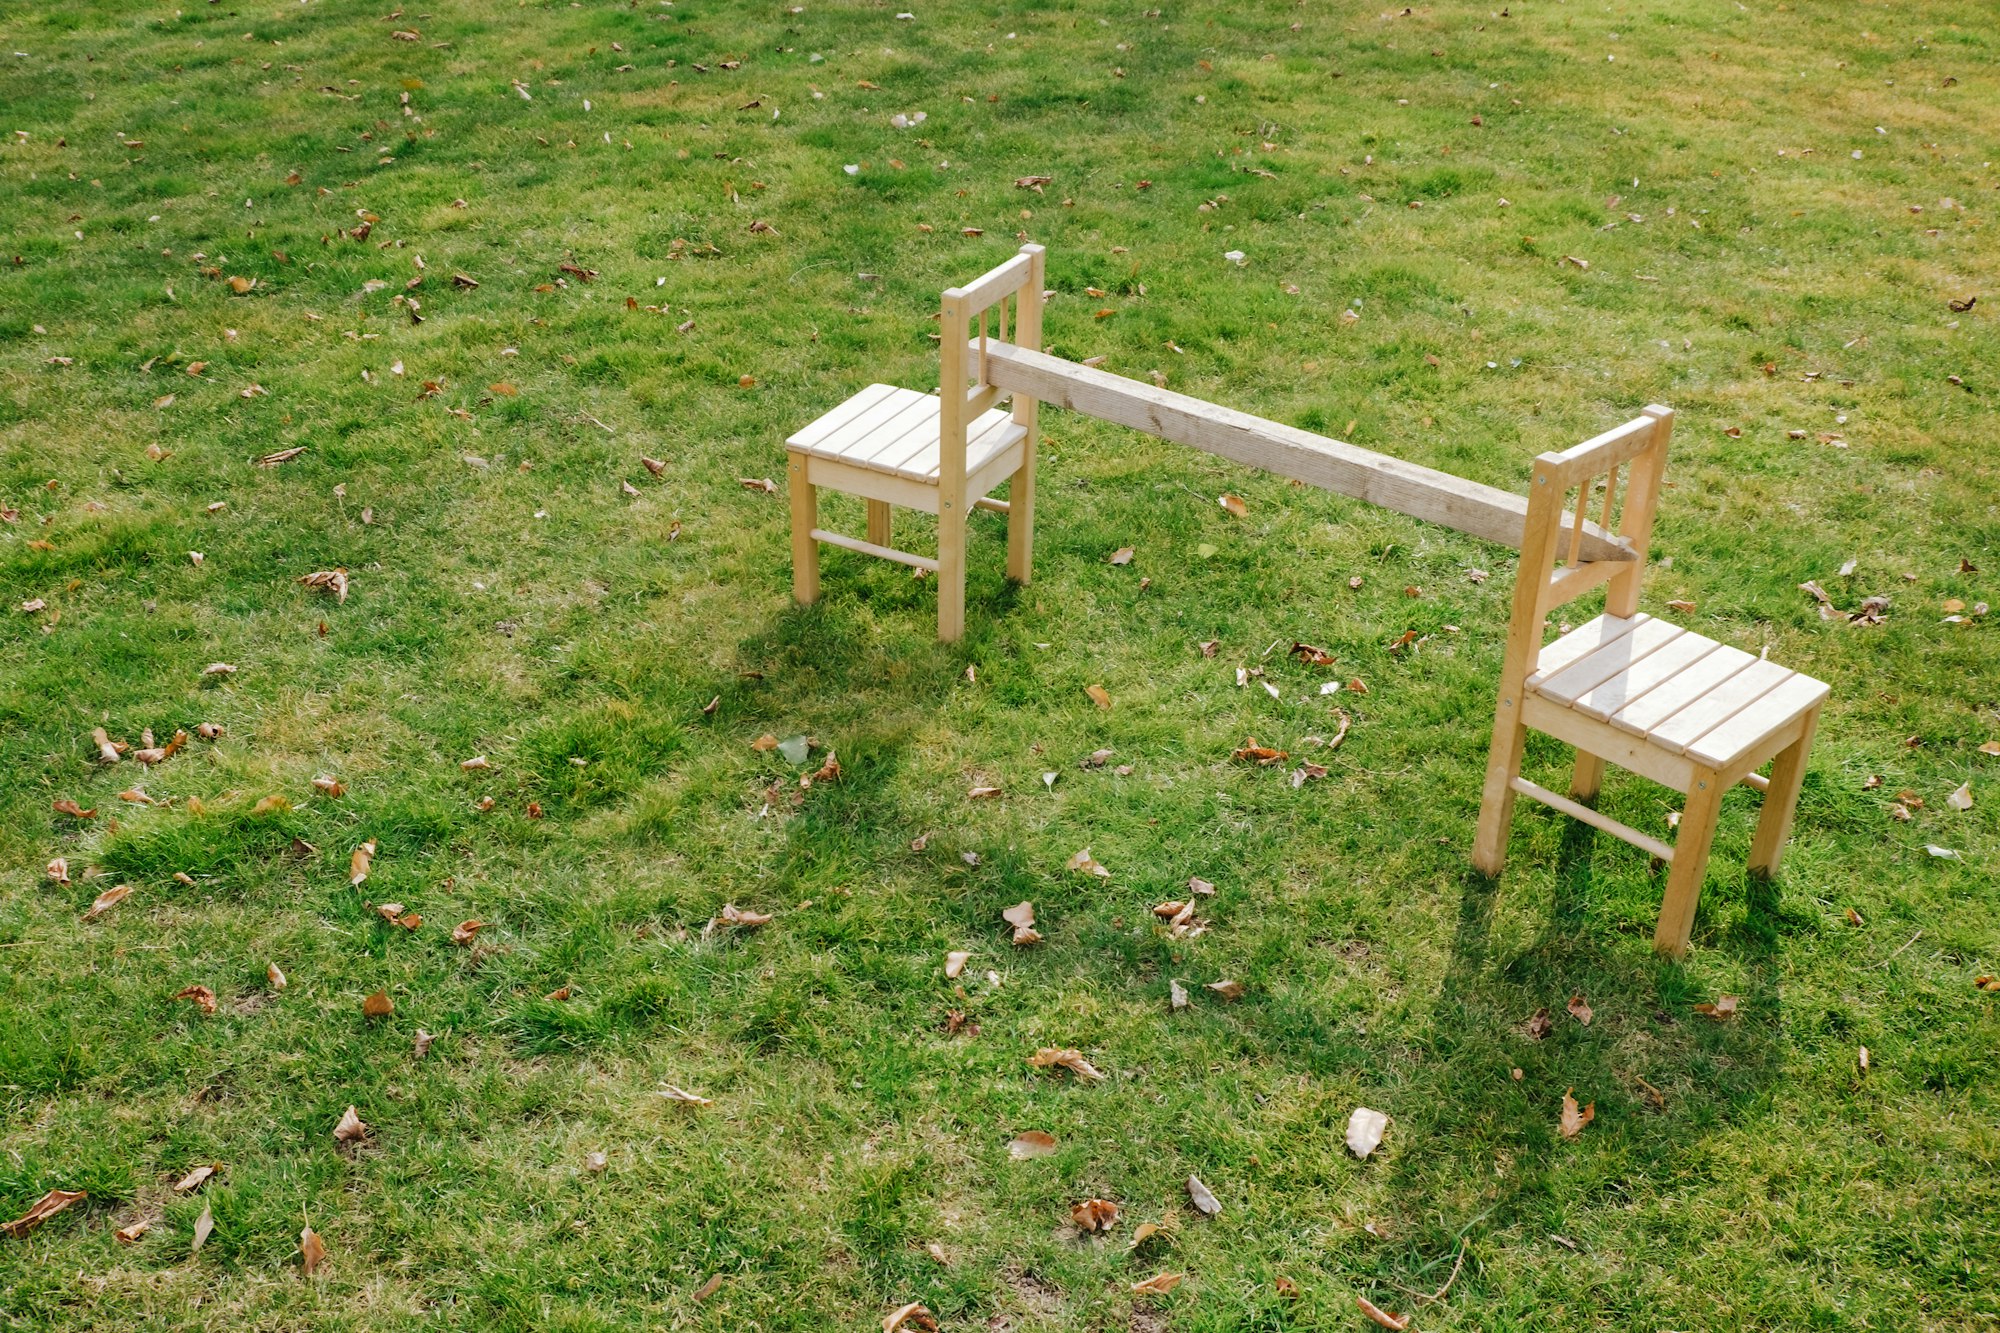 Two chairs in the green grass.